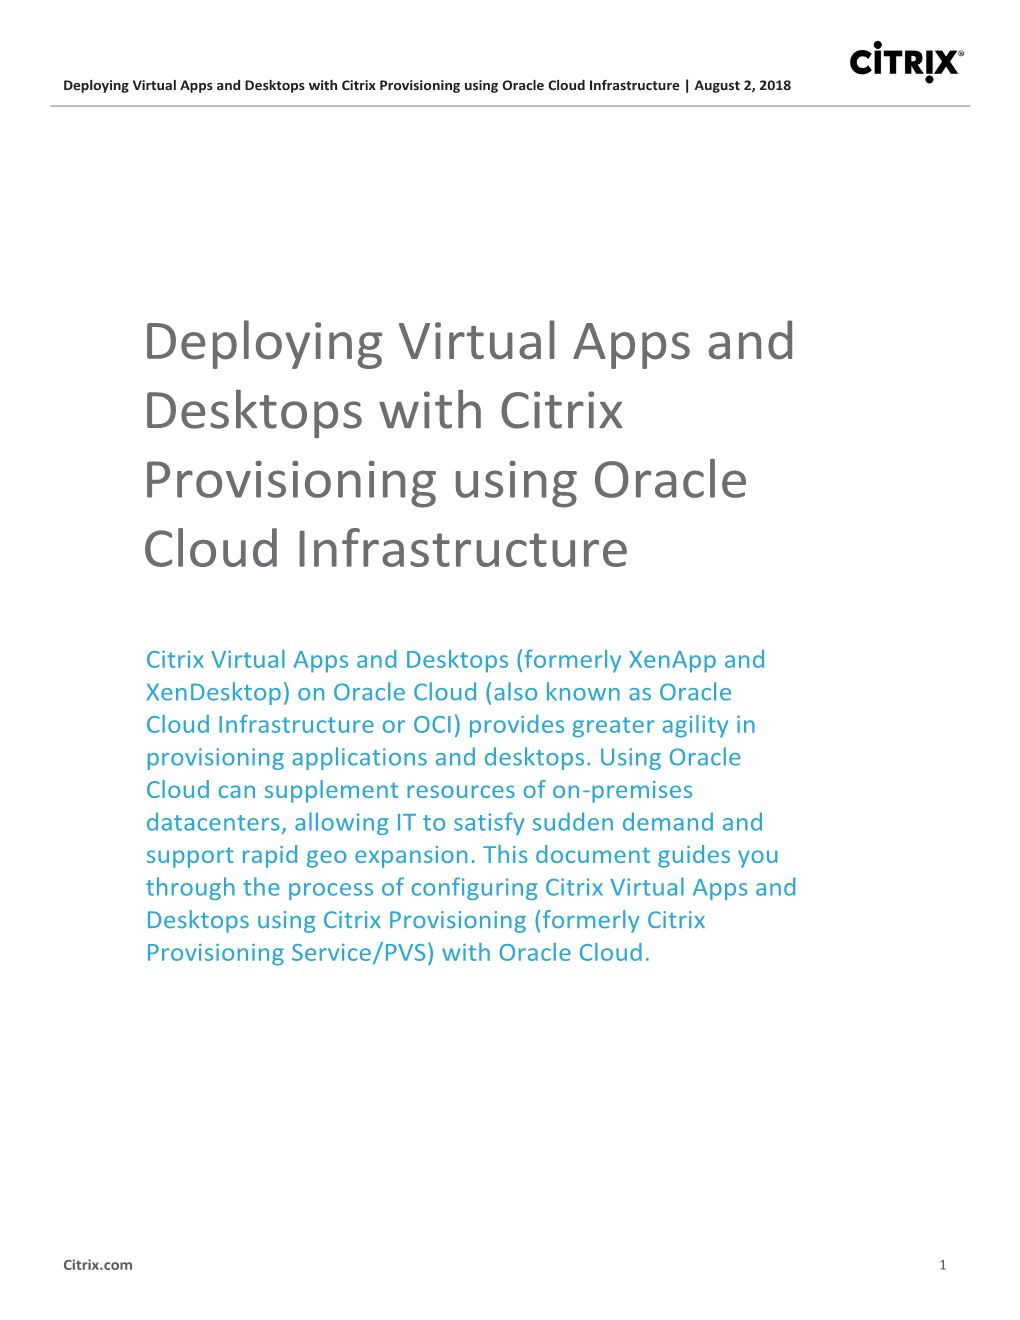 Deploying Virtual Apps and Desktops with Citrix Provisioning Using Oracle Cloud Infrastructure | August 2, 2018